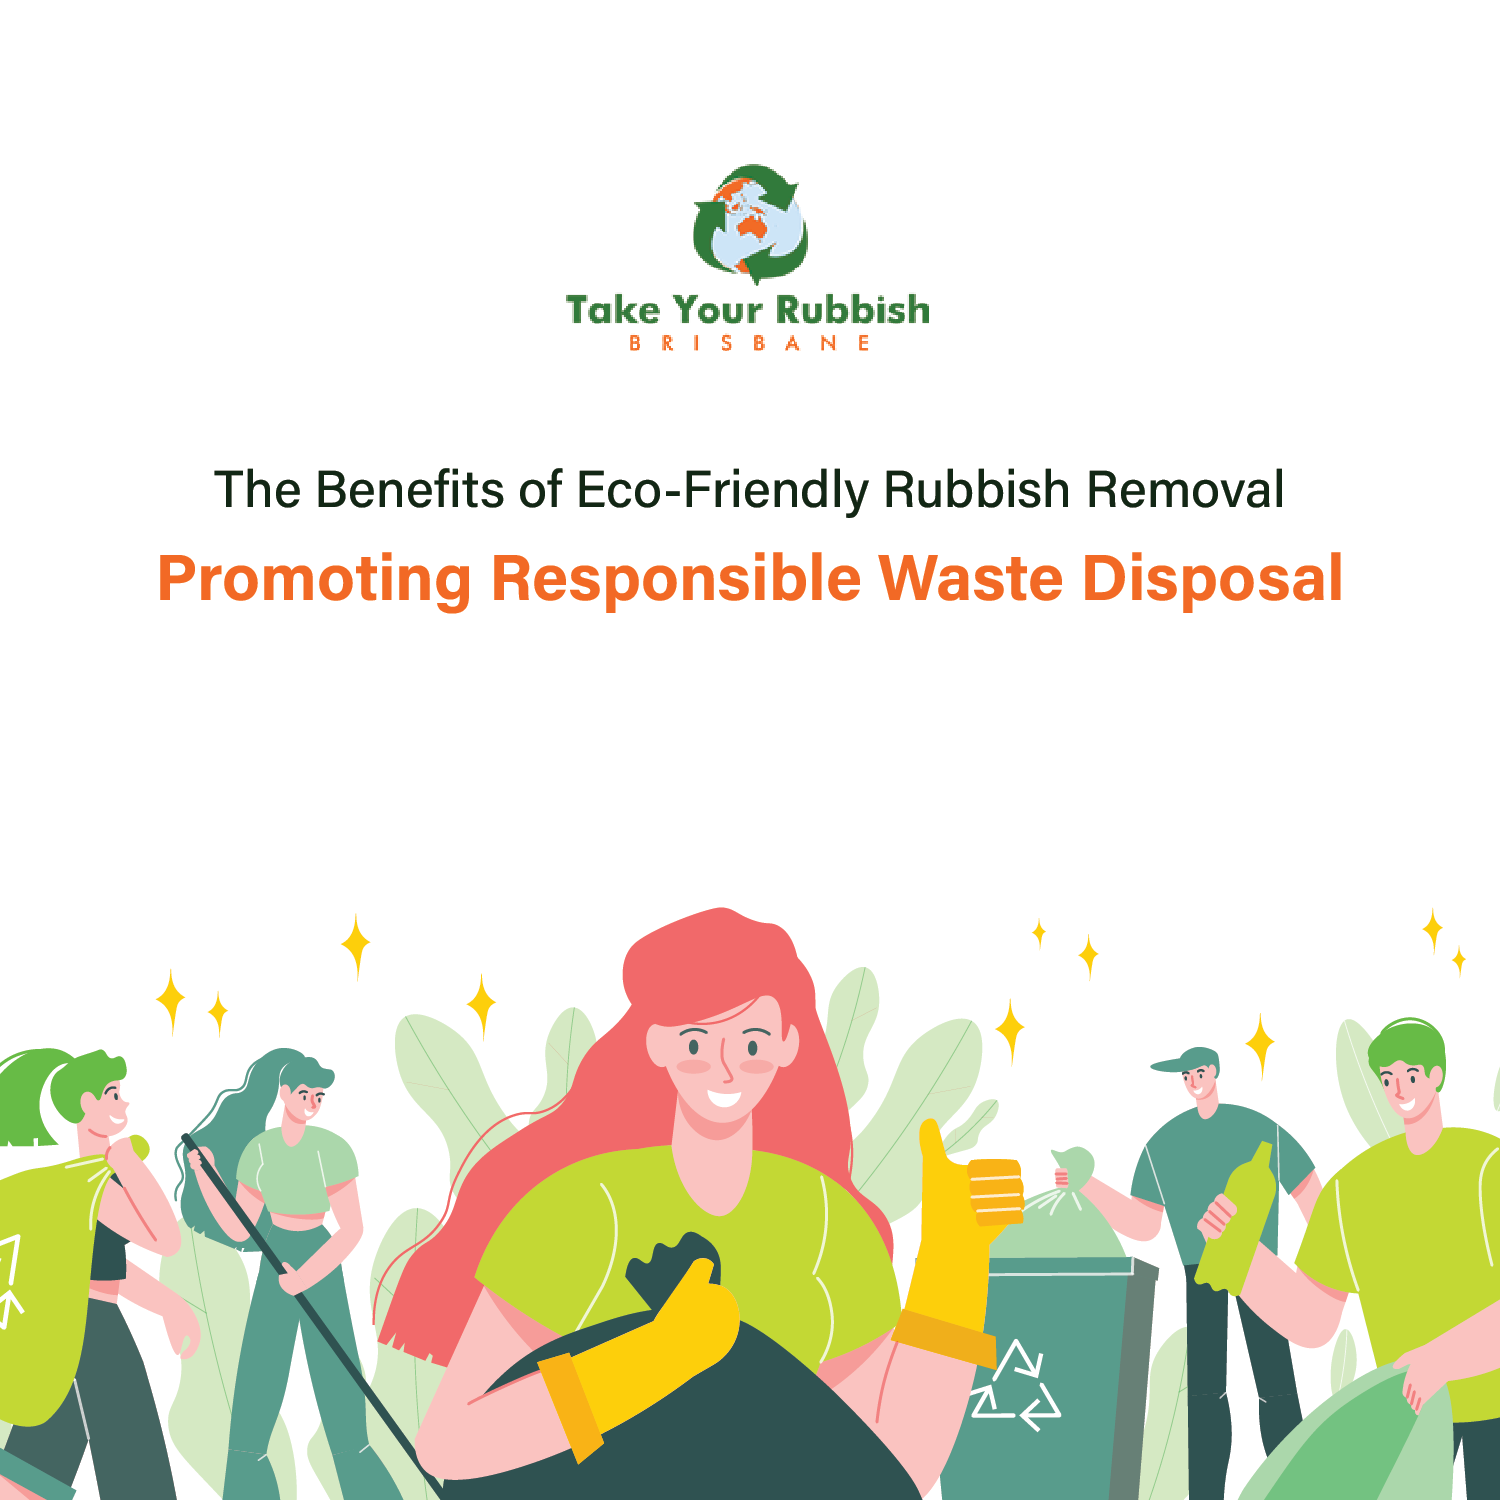 You are currently viewing The Benefits of Eco-Friendly Rubbish Removal: Promoting Responsible Waste Disposal